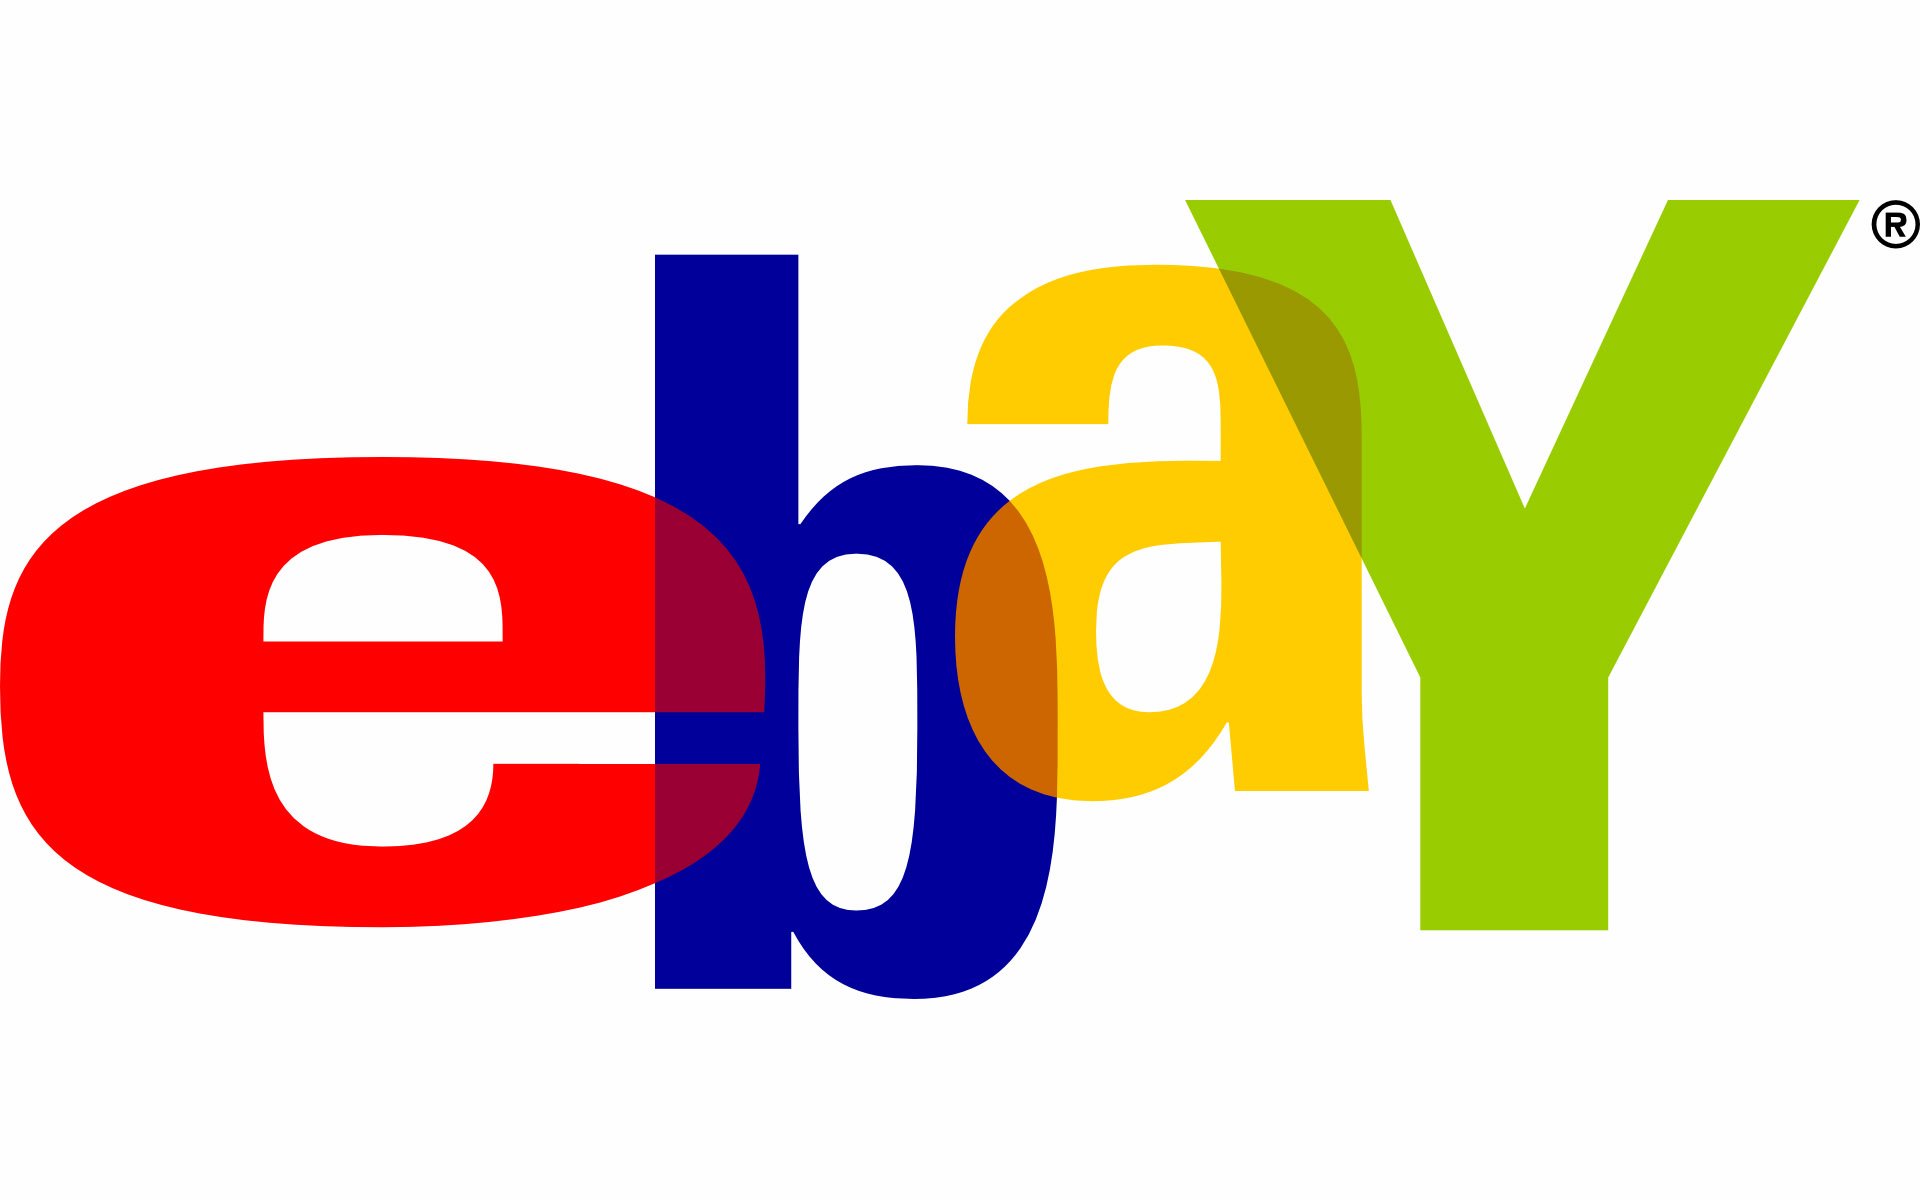 Buy It Now! eBay Considering Accepting Bitcoin